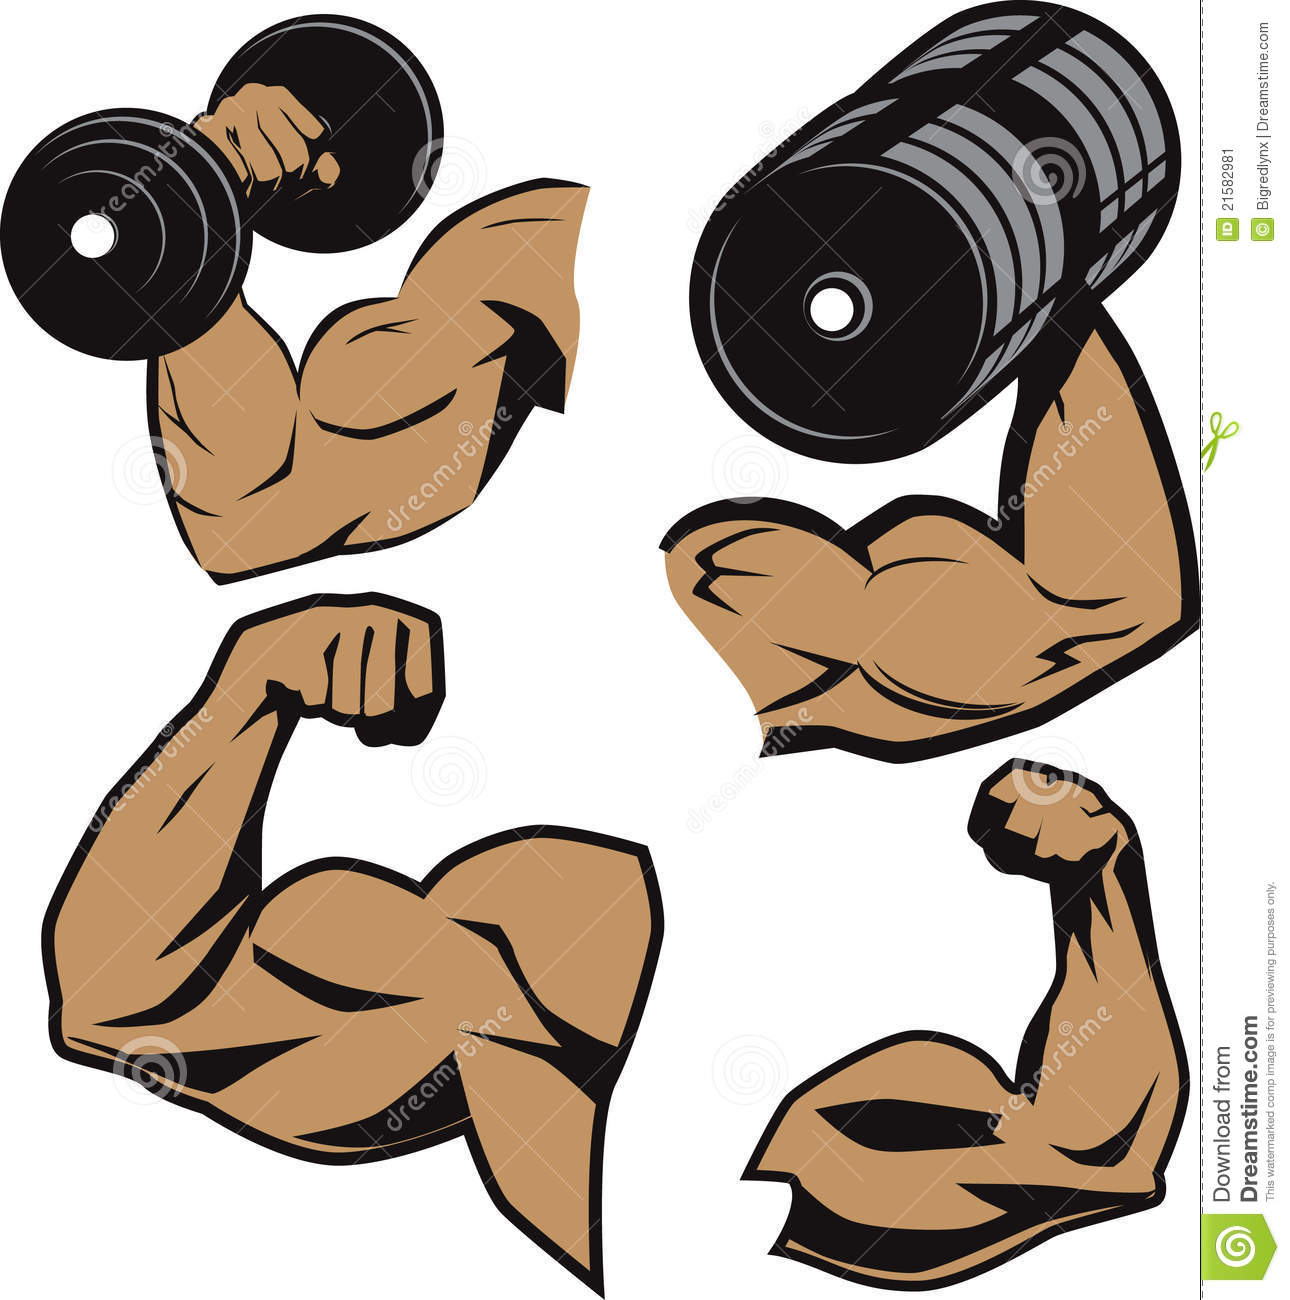 Bicep clipart flexed arm. Flexing free download best